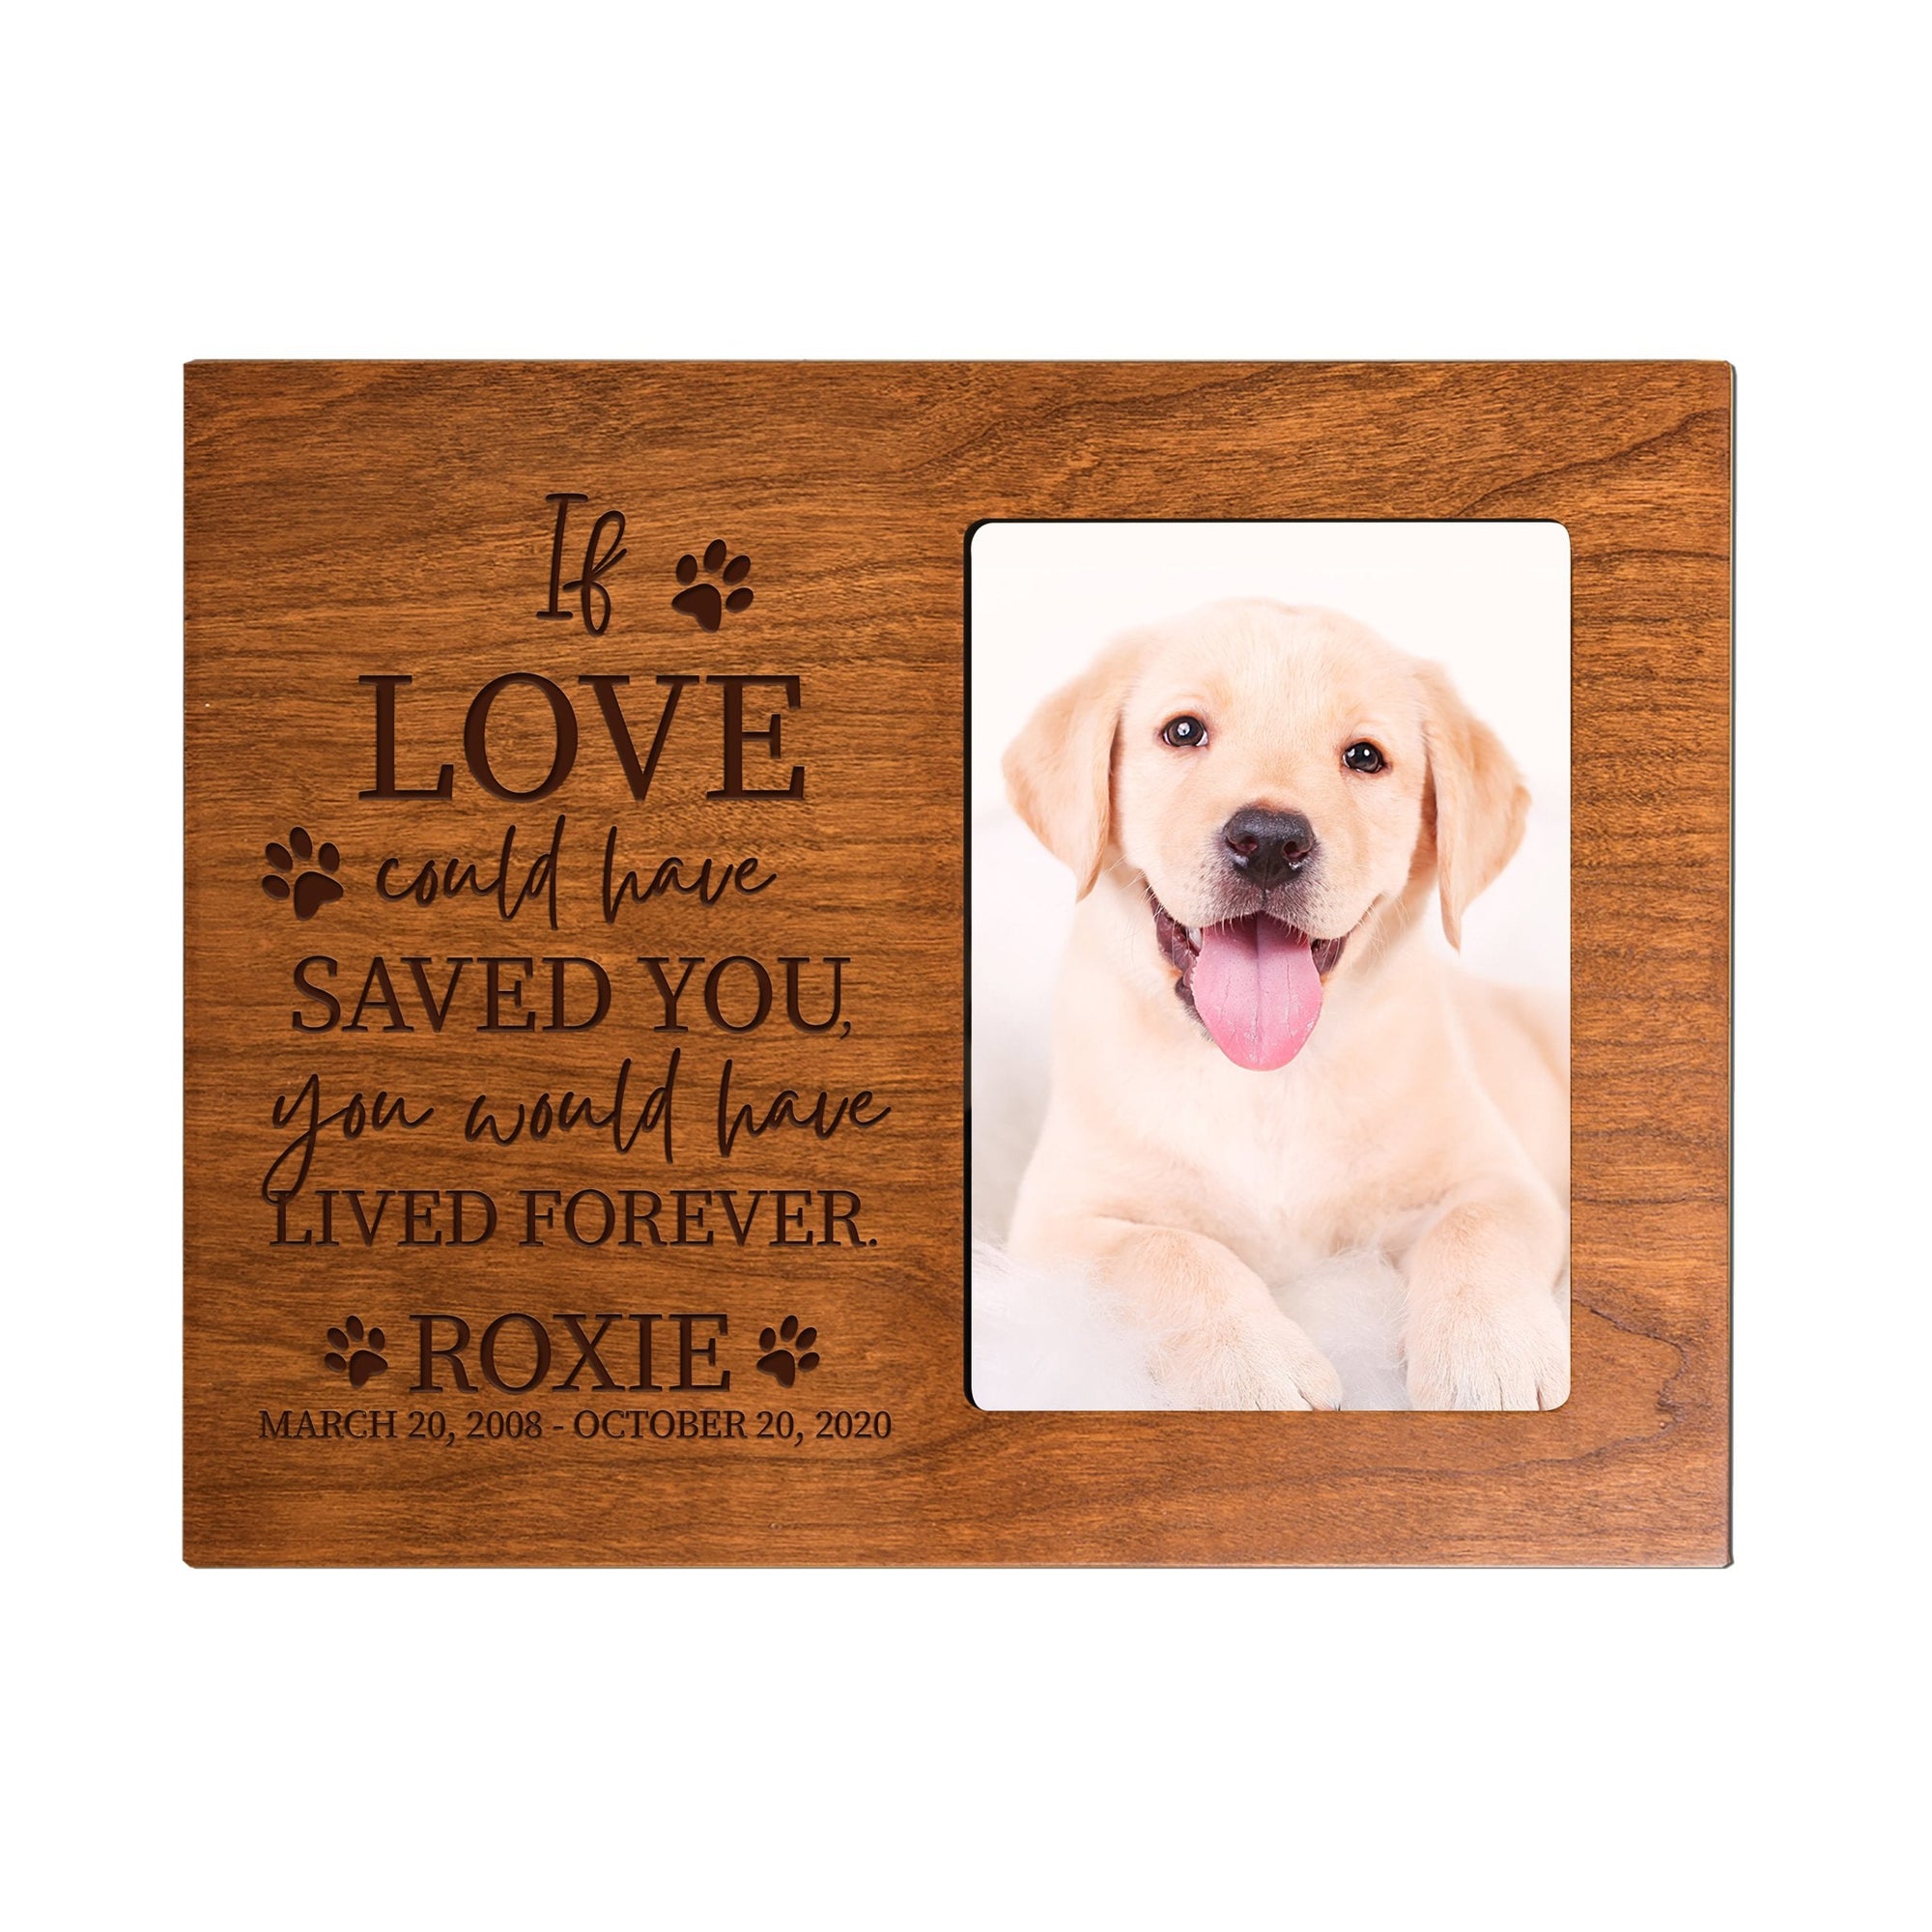 8x10 Cherry Pet Memorial Picture Frame with the phrase "If Love Could Have Saved You"